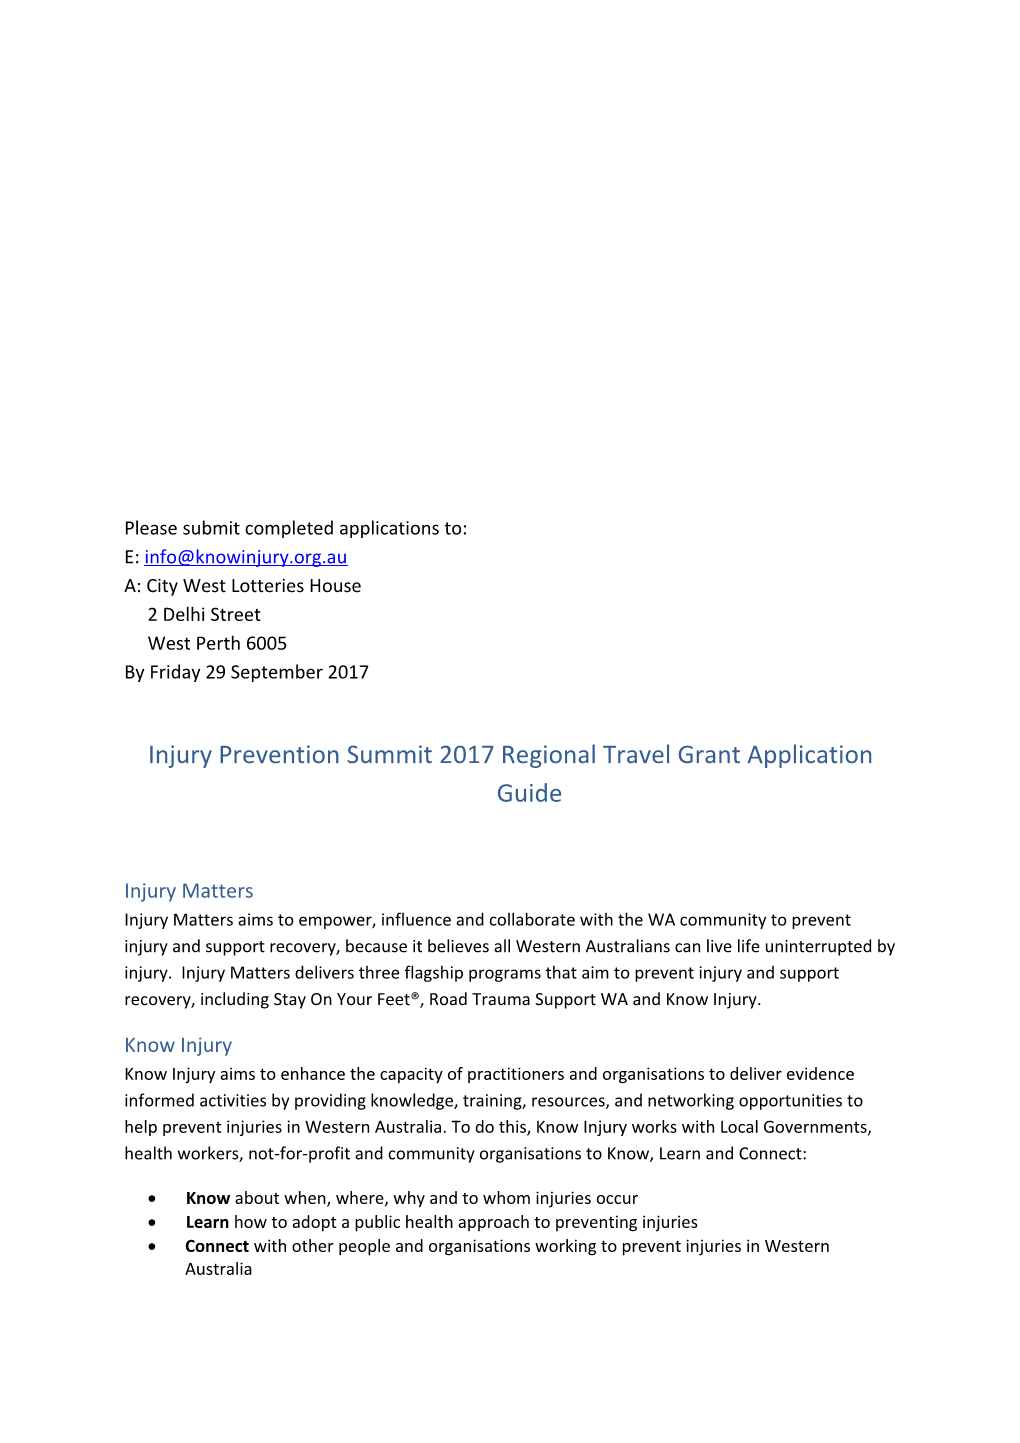 Injury Prevention Summit 2017 Regional Travel Grant Application Guide